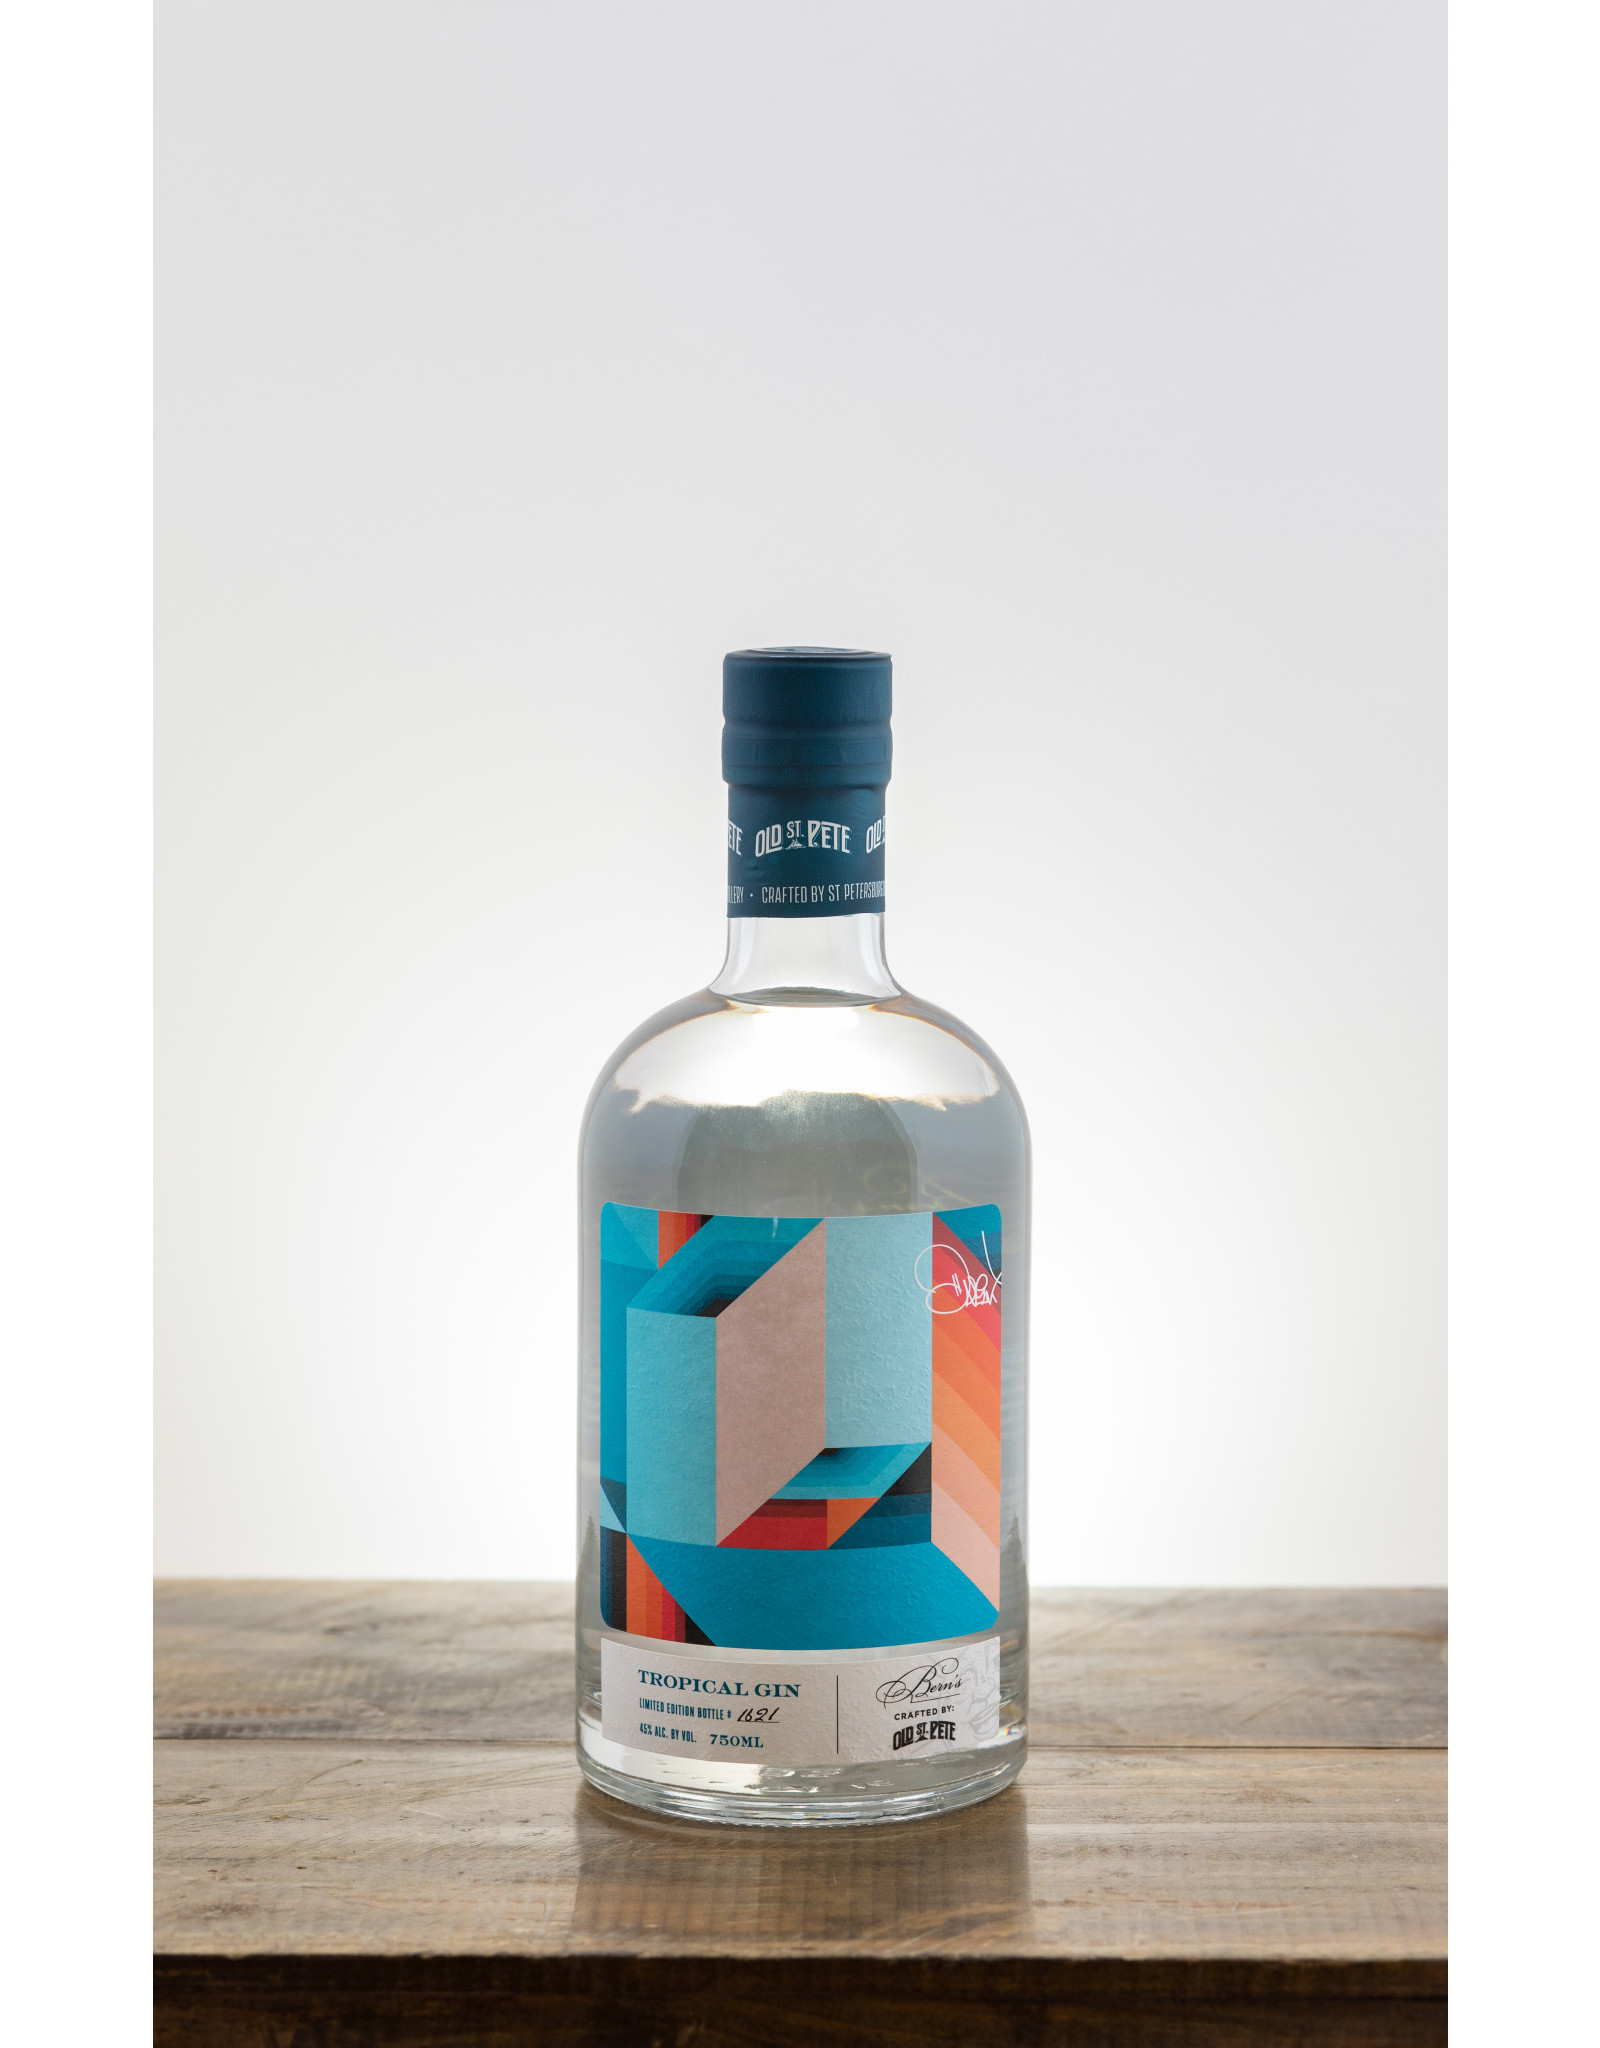 Epicurean/Edge Old St. Pete Craft Spirits Tropical Gin